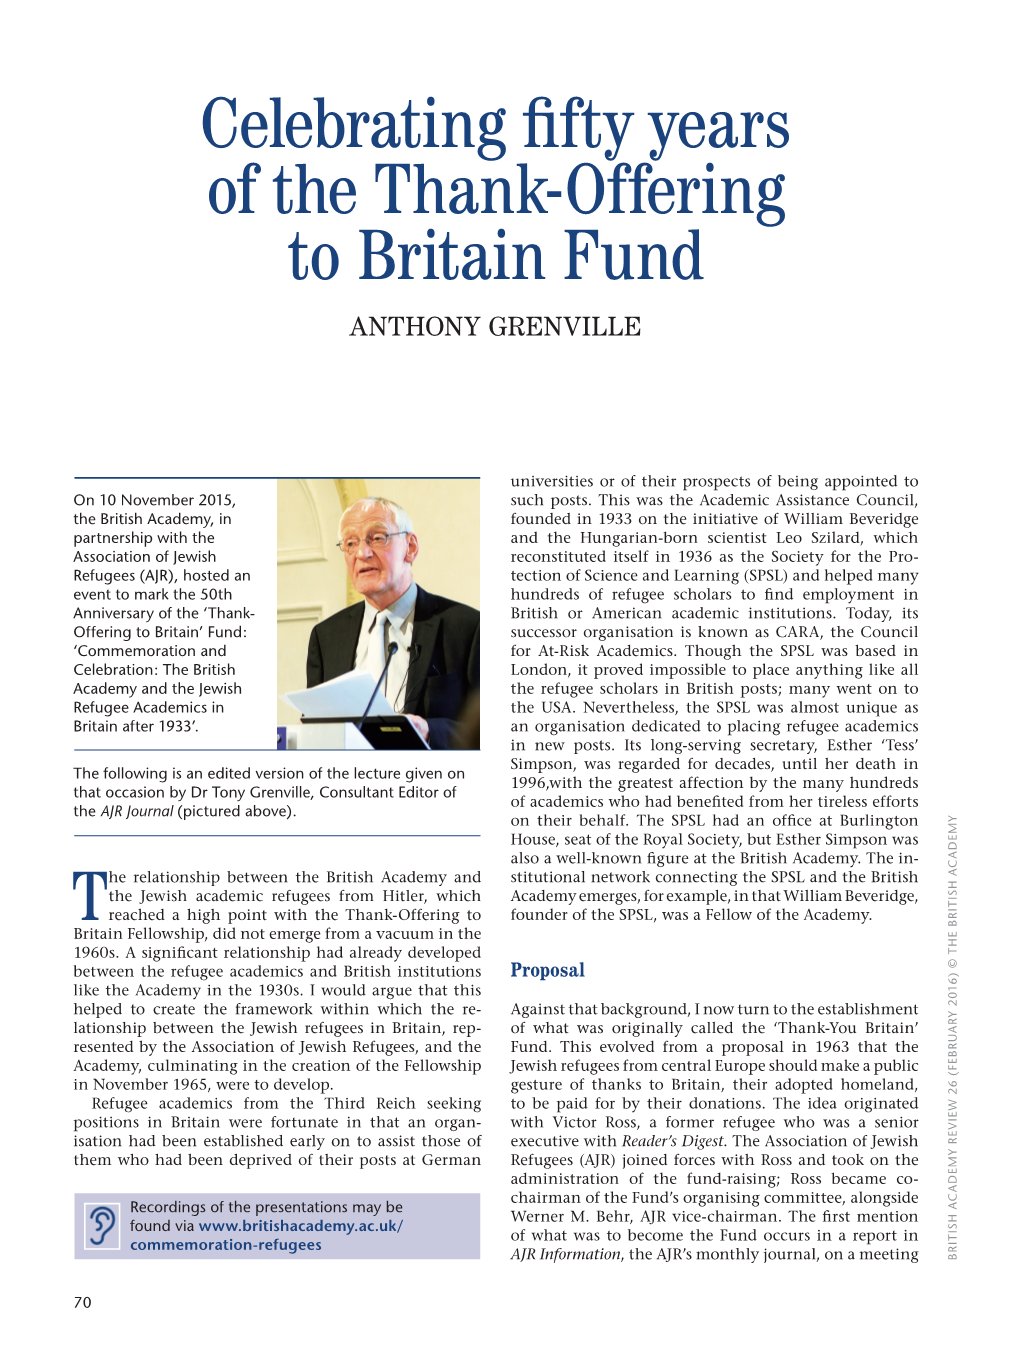 Celebrating Fifty Years of the Thank-Offering to Britain Fund ANTHONY GRENVILLE